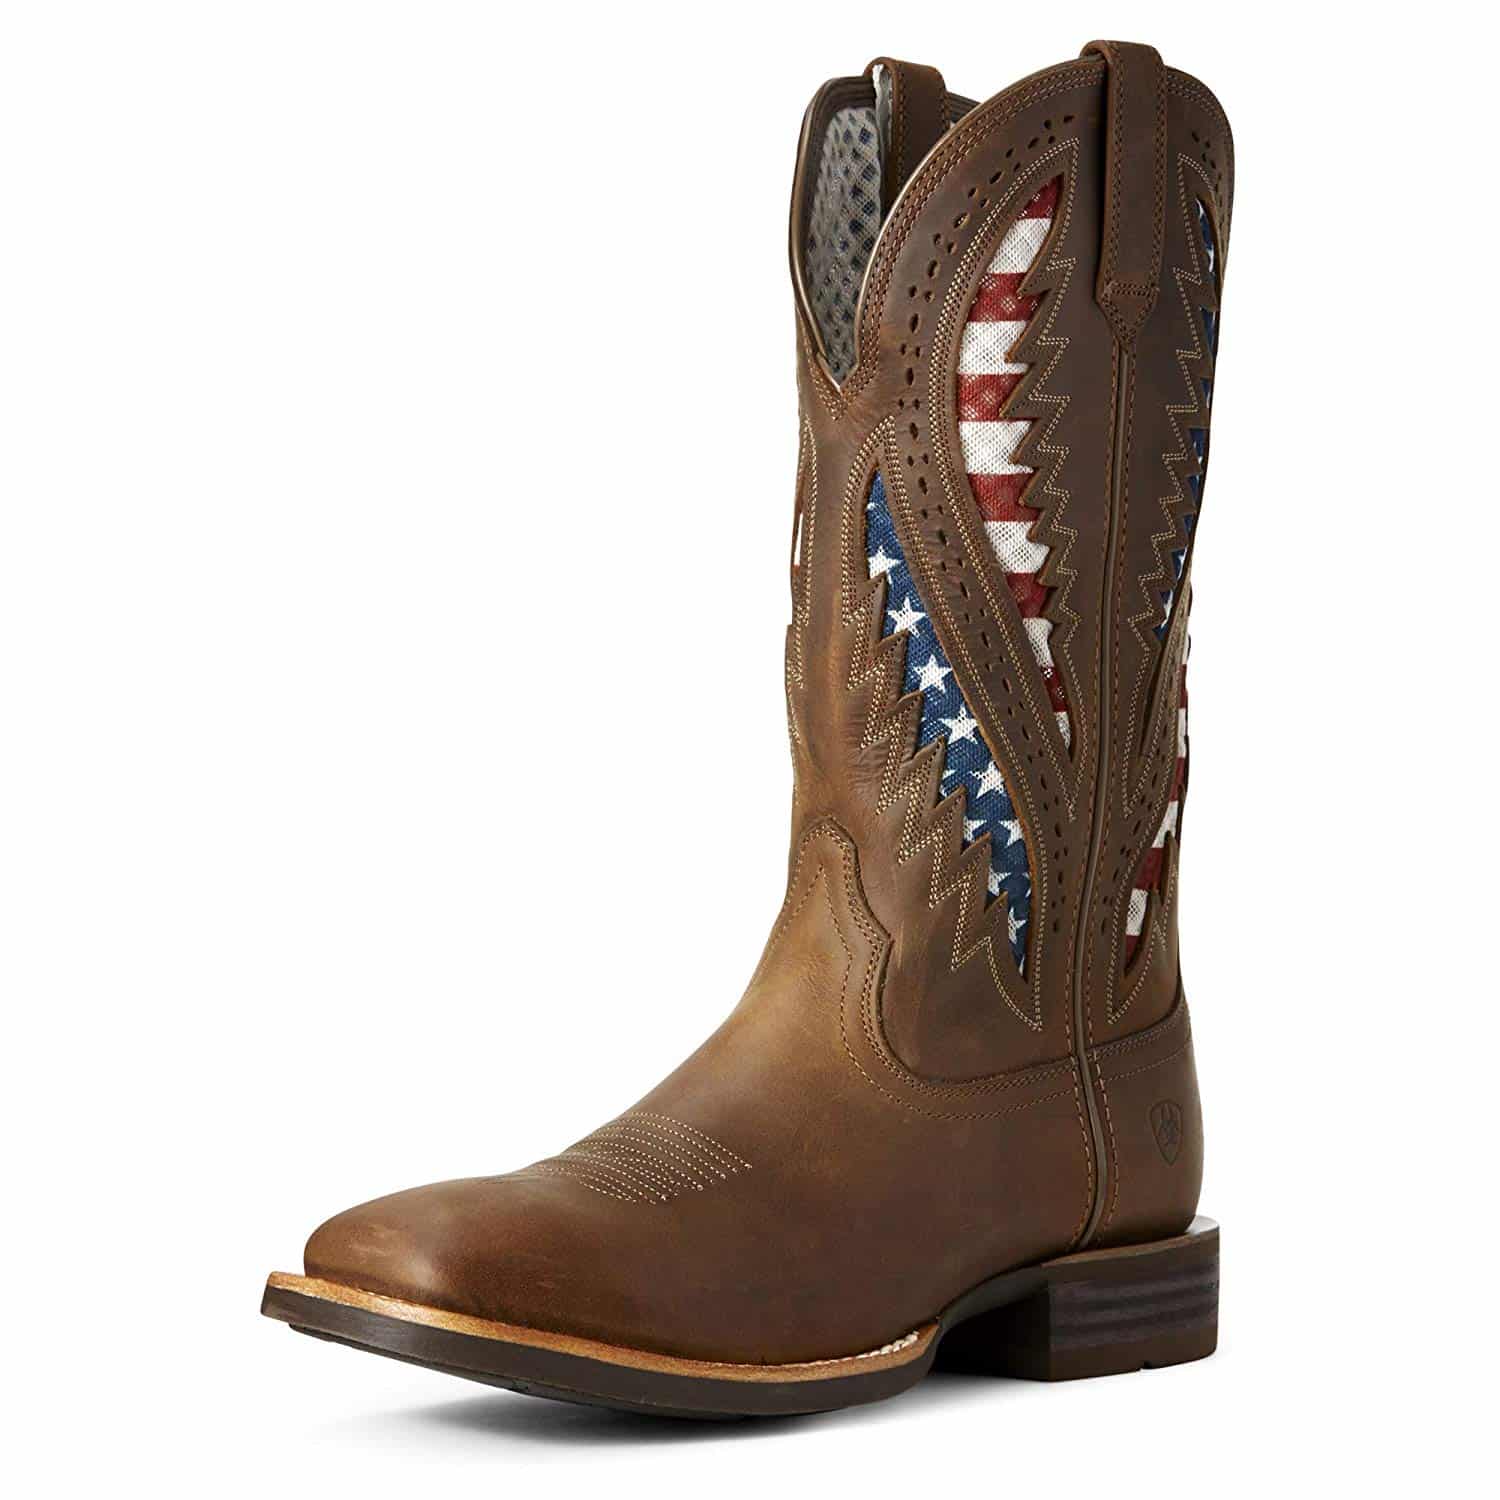 Top 10 Best Most Comfortable Cowboy Boots for Walking in 2023 Reviews